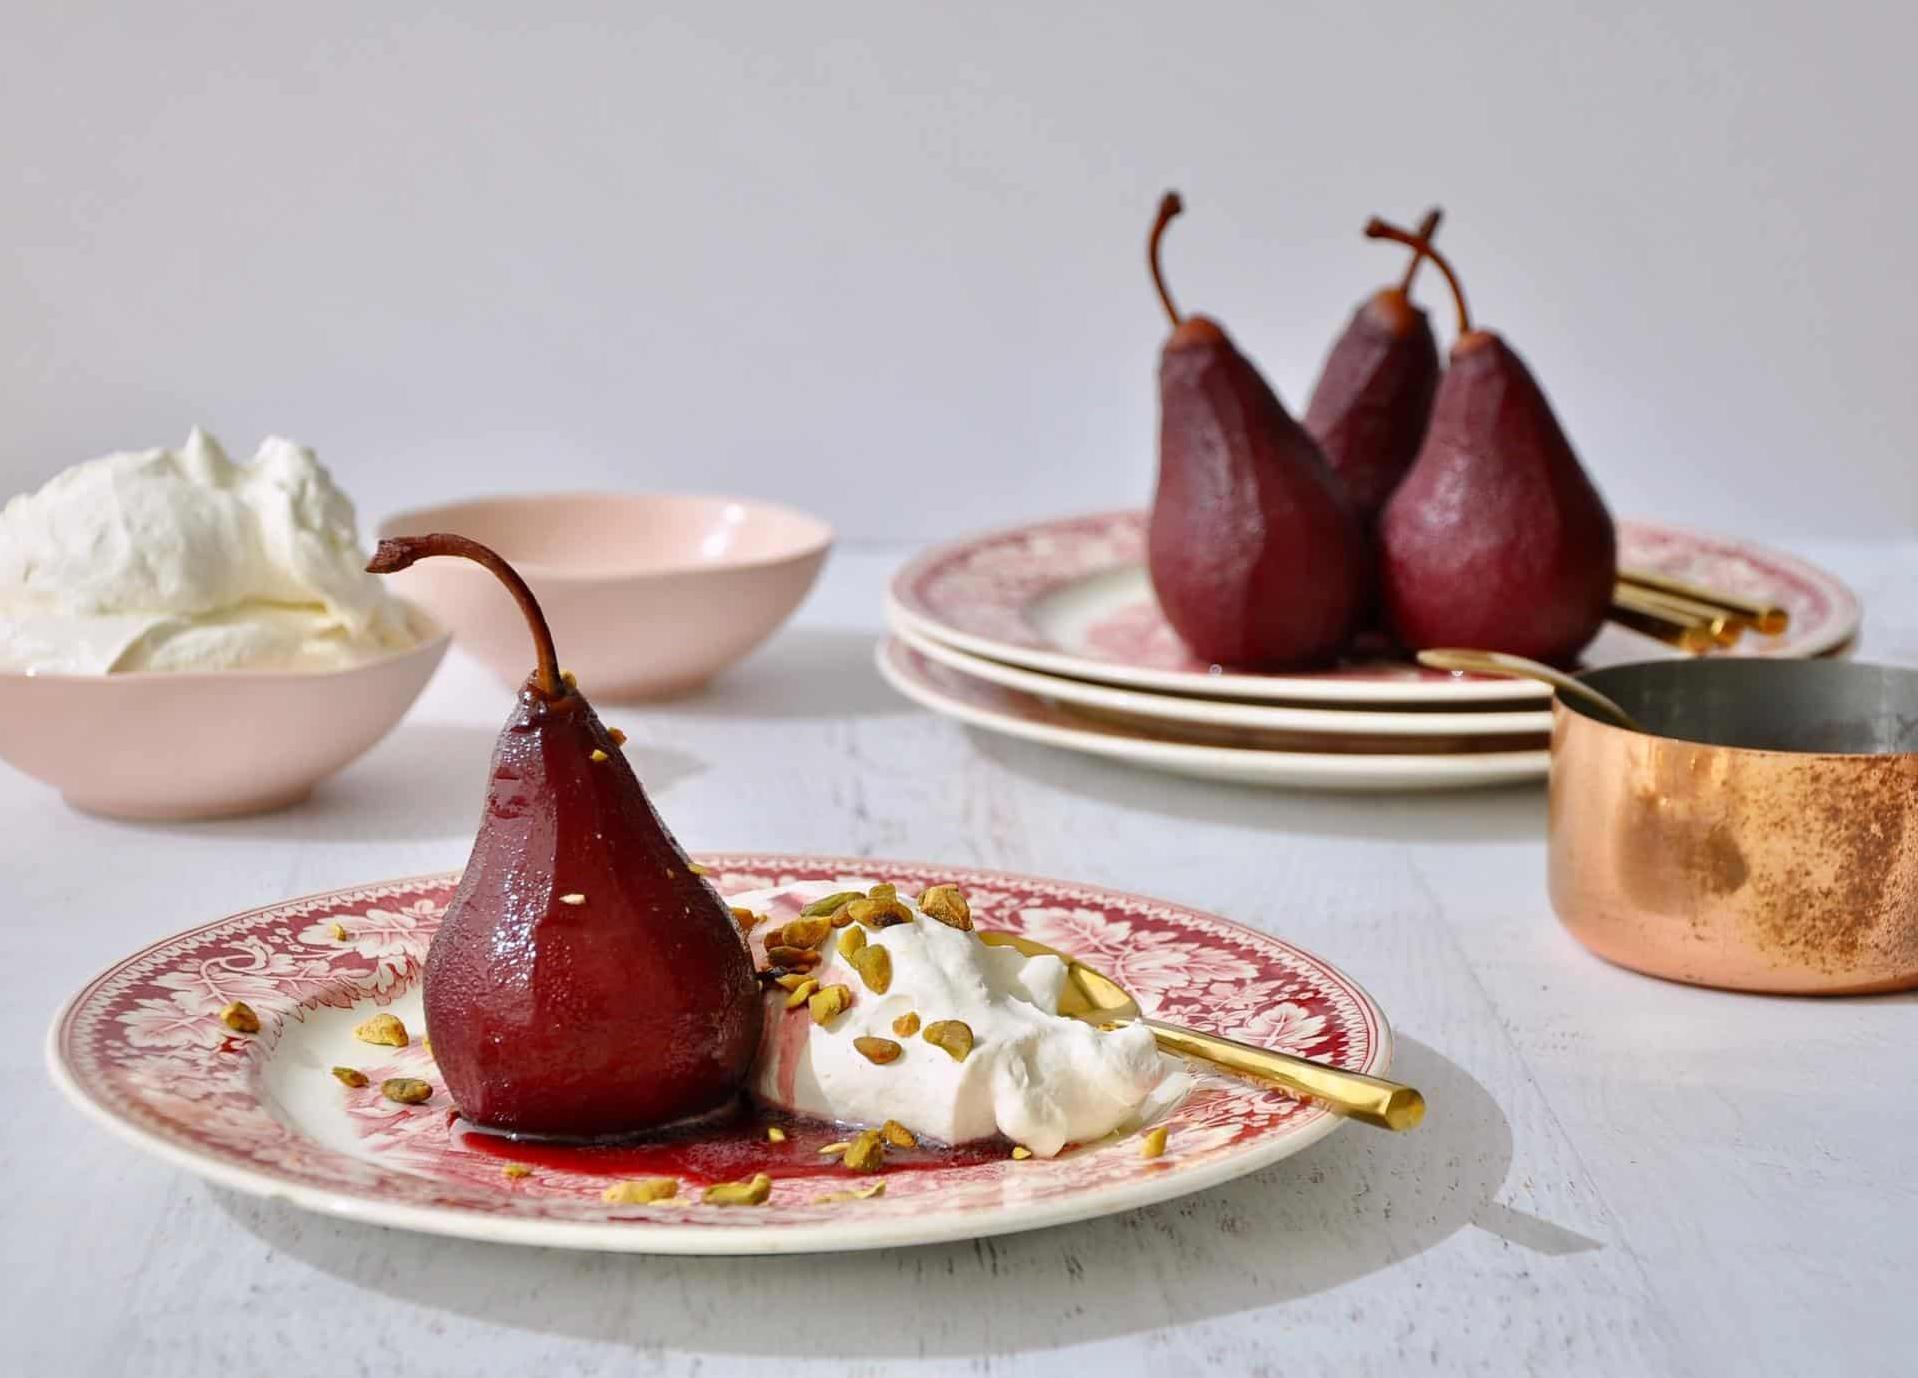  Poaching pears has never been so easy or delicious.